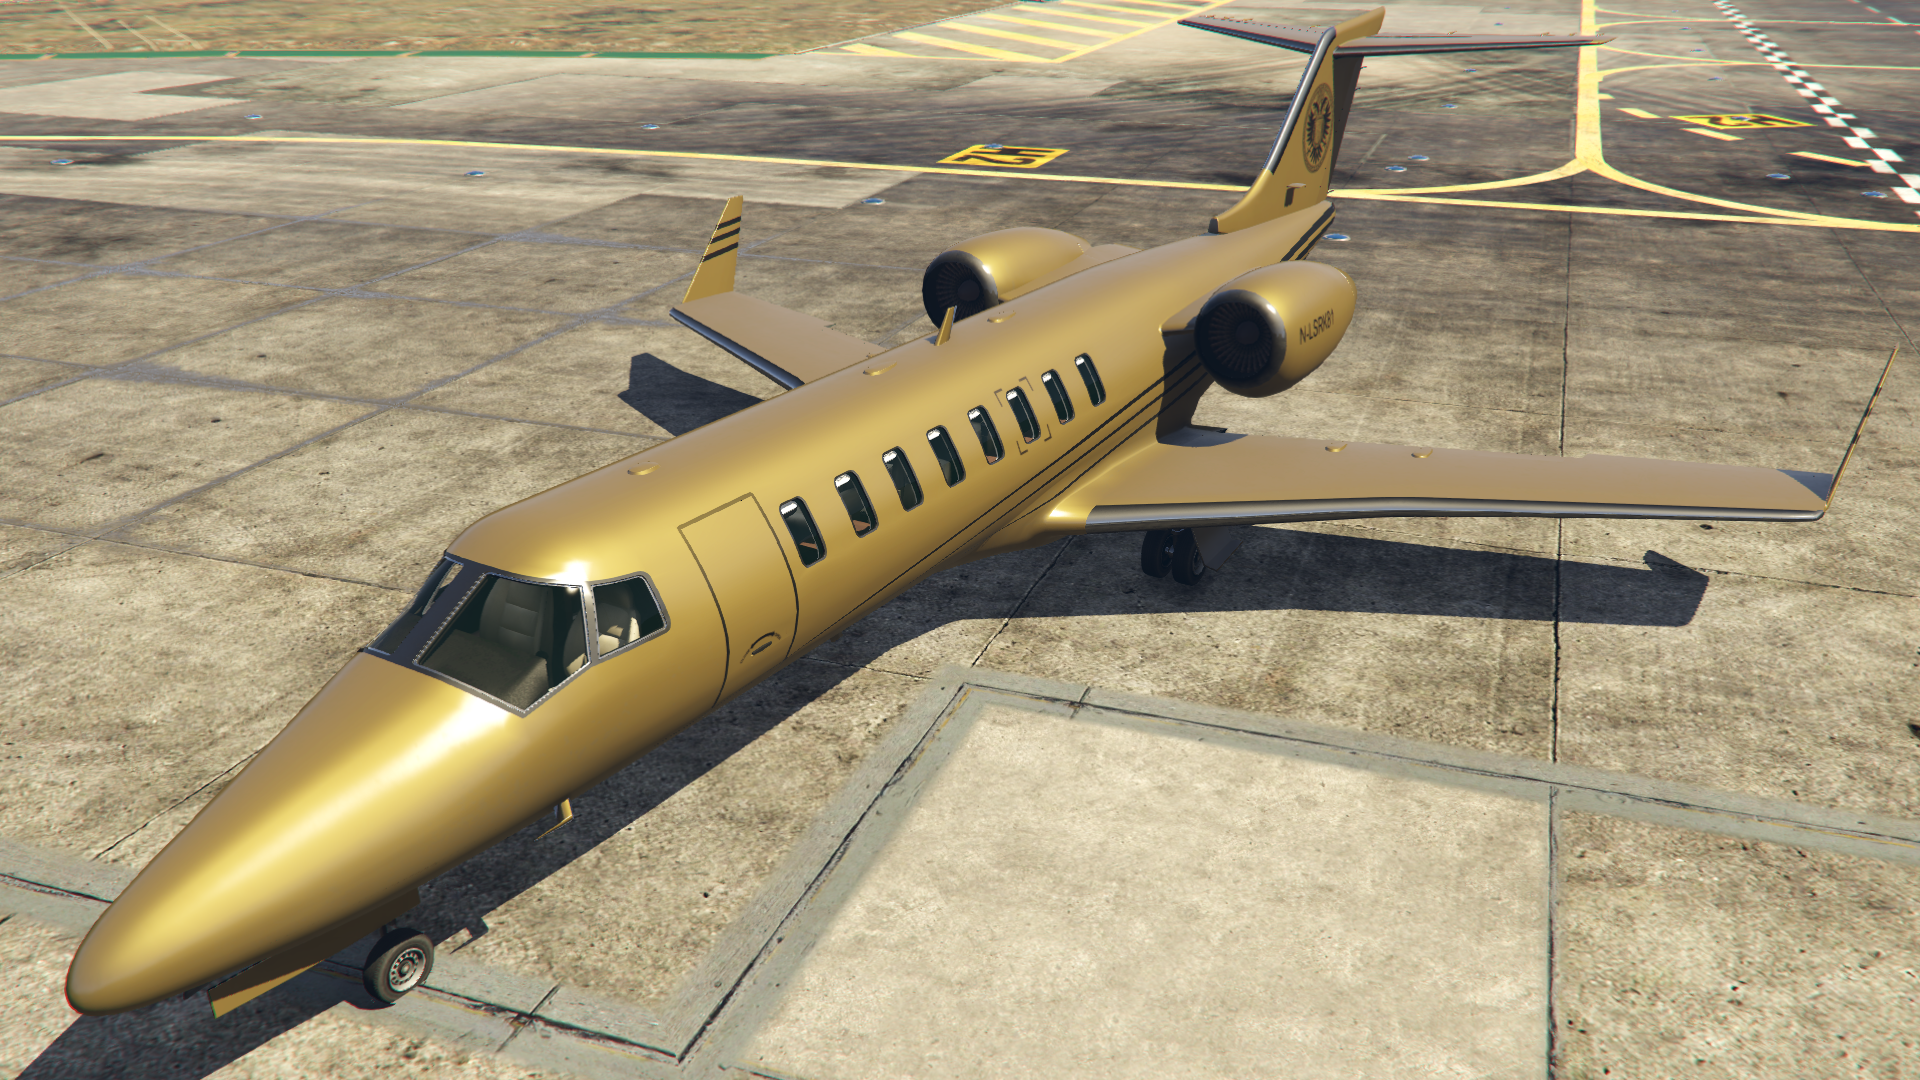 The Buckingham Luxor Deluxe is a private jet featured in Grand Theft Auto V...